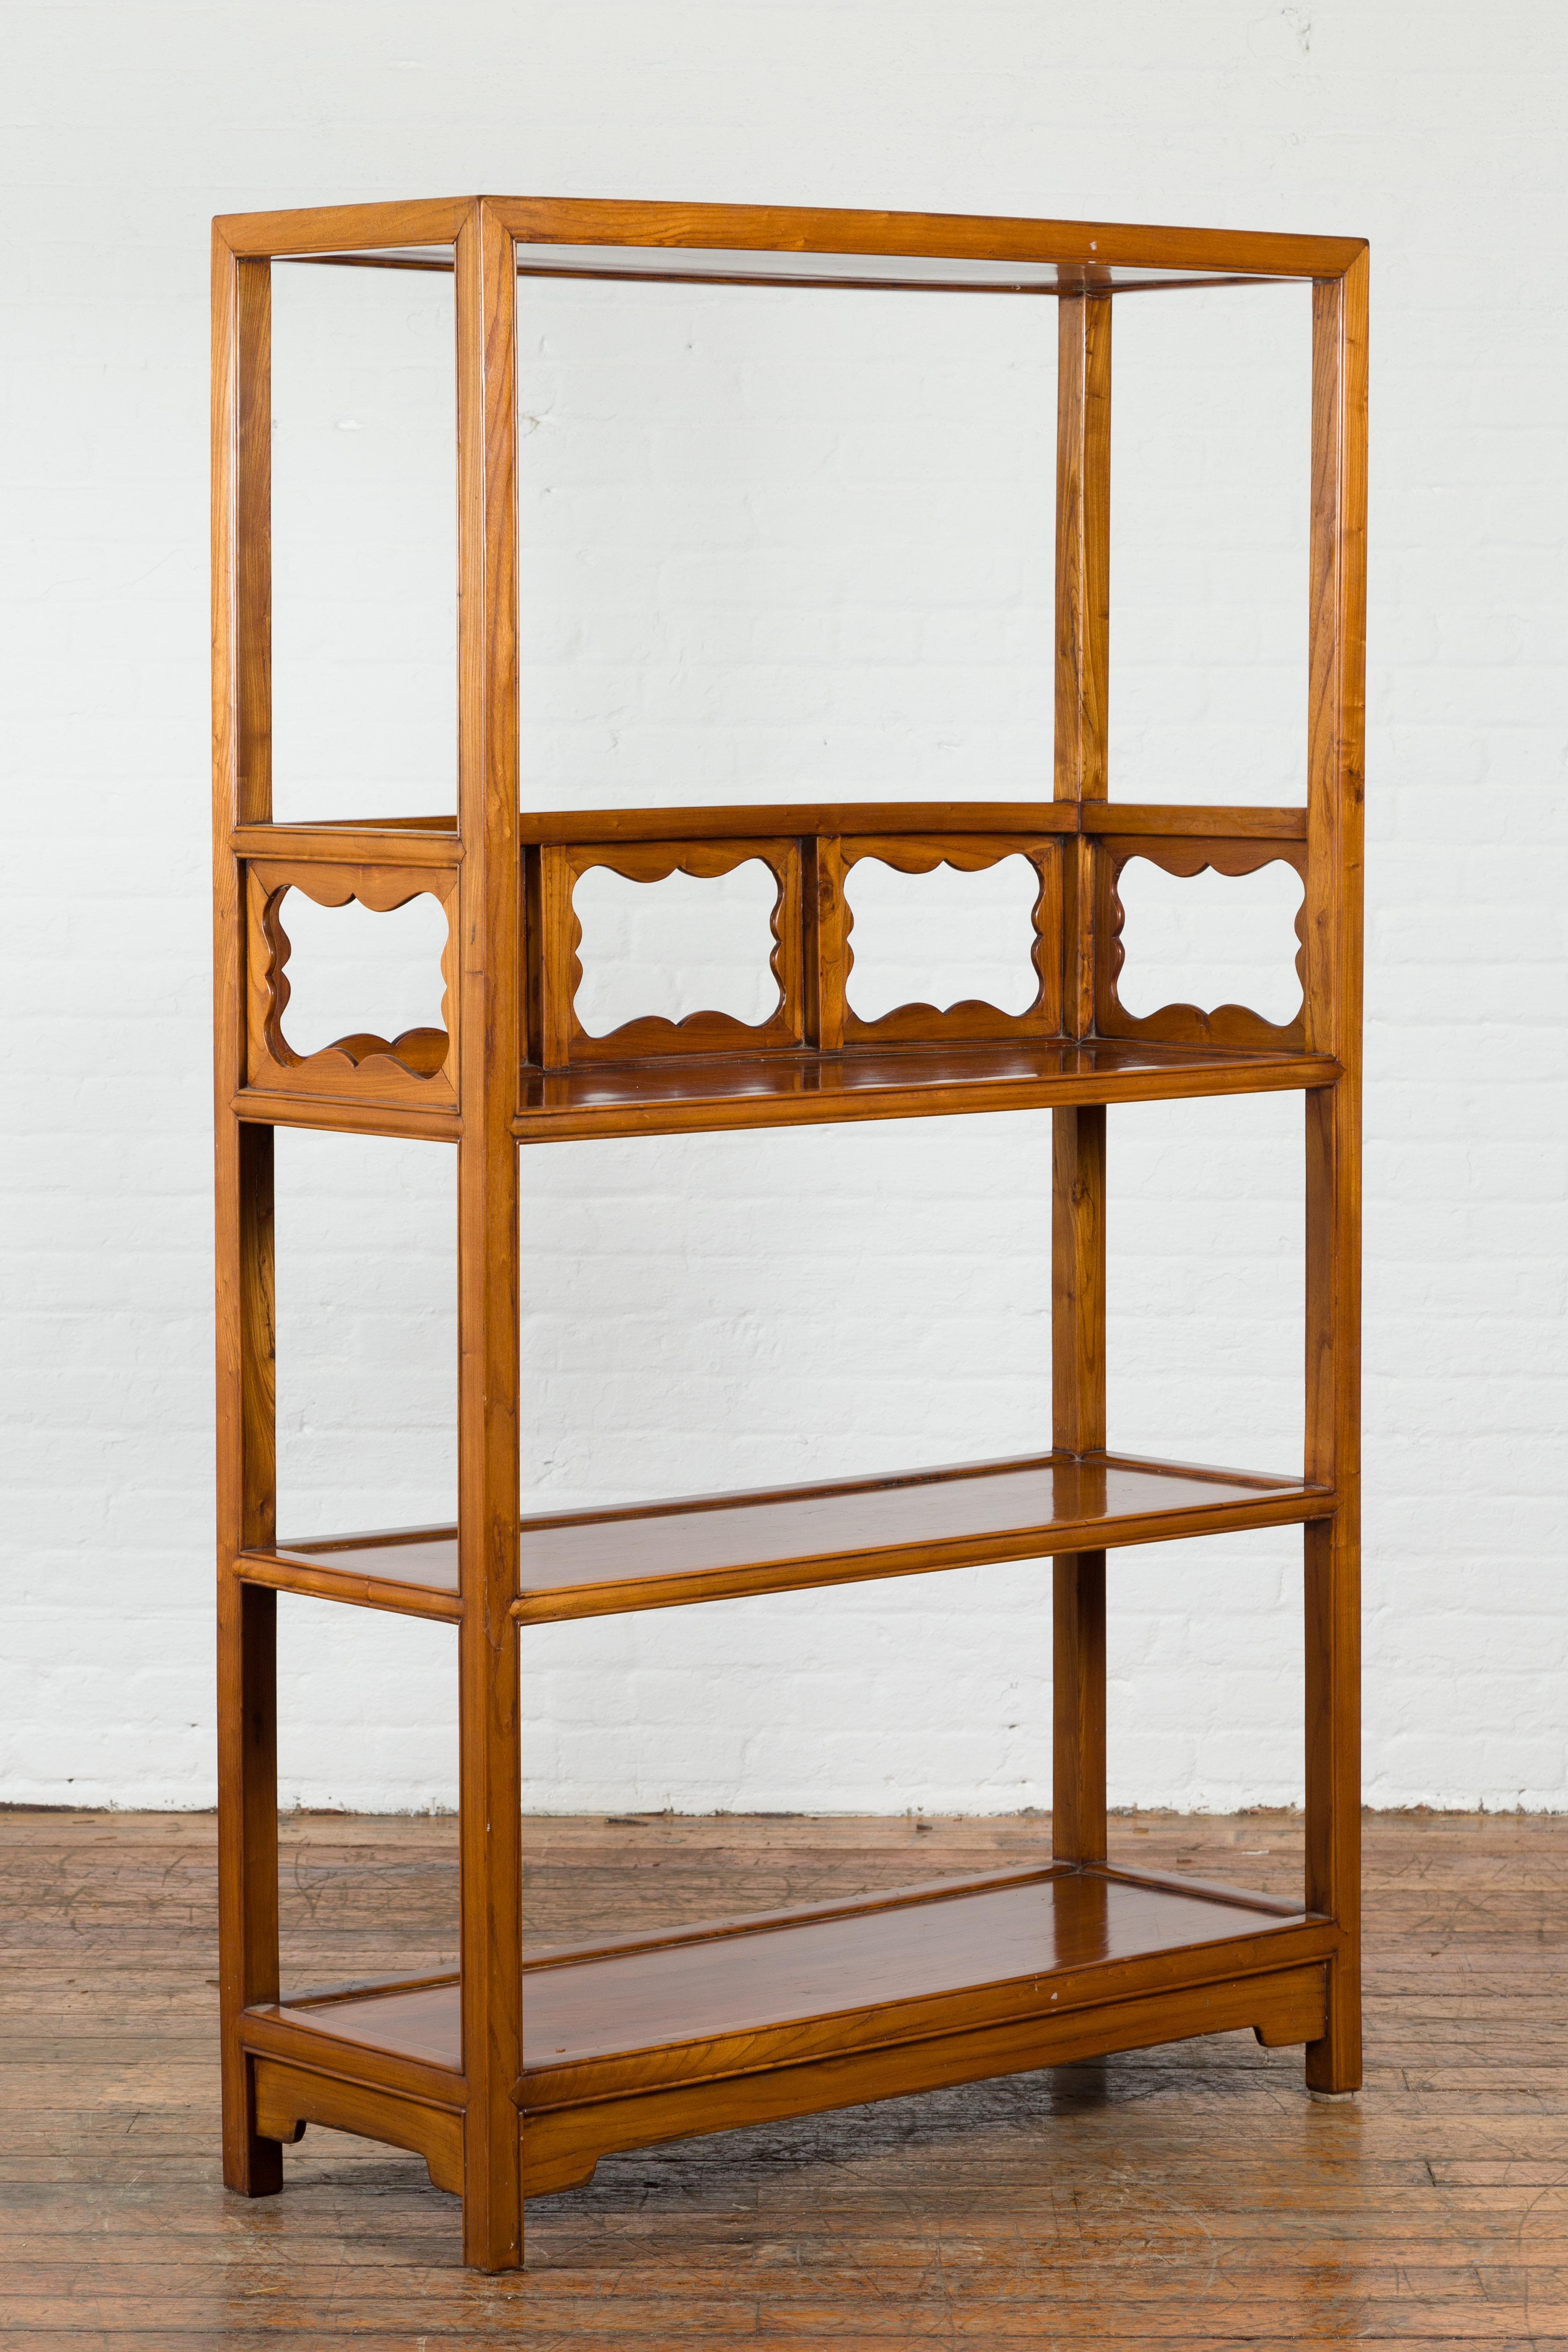 A 19th century Qing Dynasty antique cabinet that beautifully displays clean, long lines  and artistic carvings. This antique bookshelf features three rectangular shelves offering plenty of room for books or decorative antique accent pieces. The top